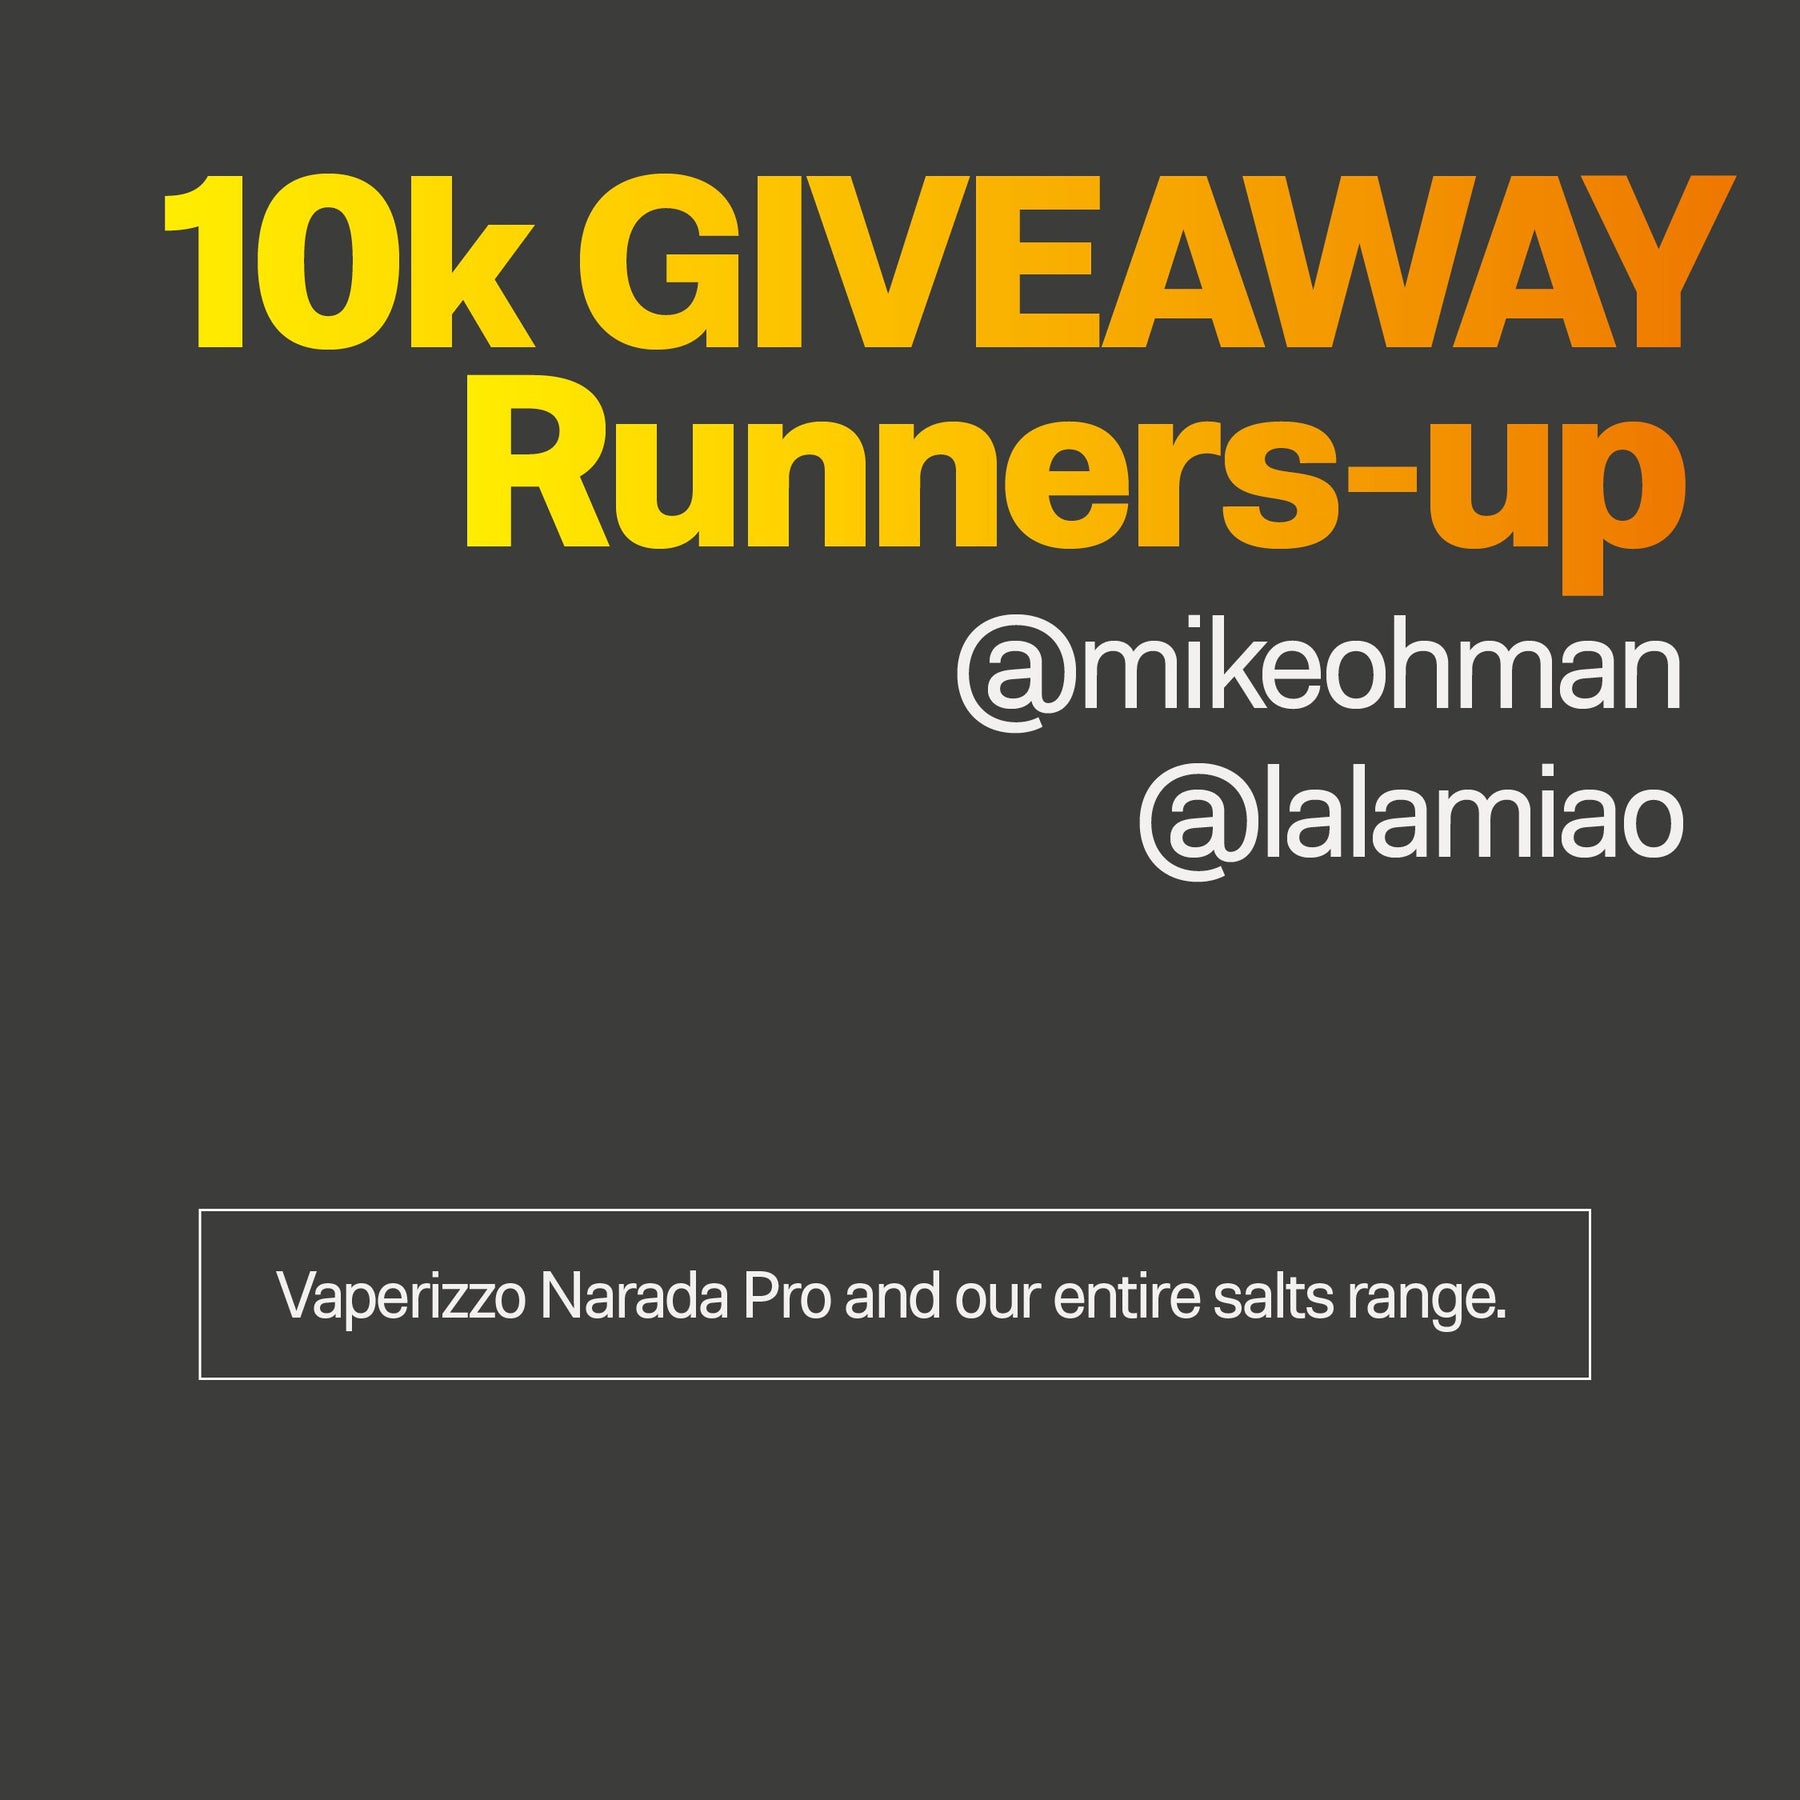 News-10k GIVEAWAY Runners-up | We Are Supergood.